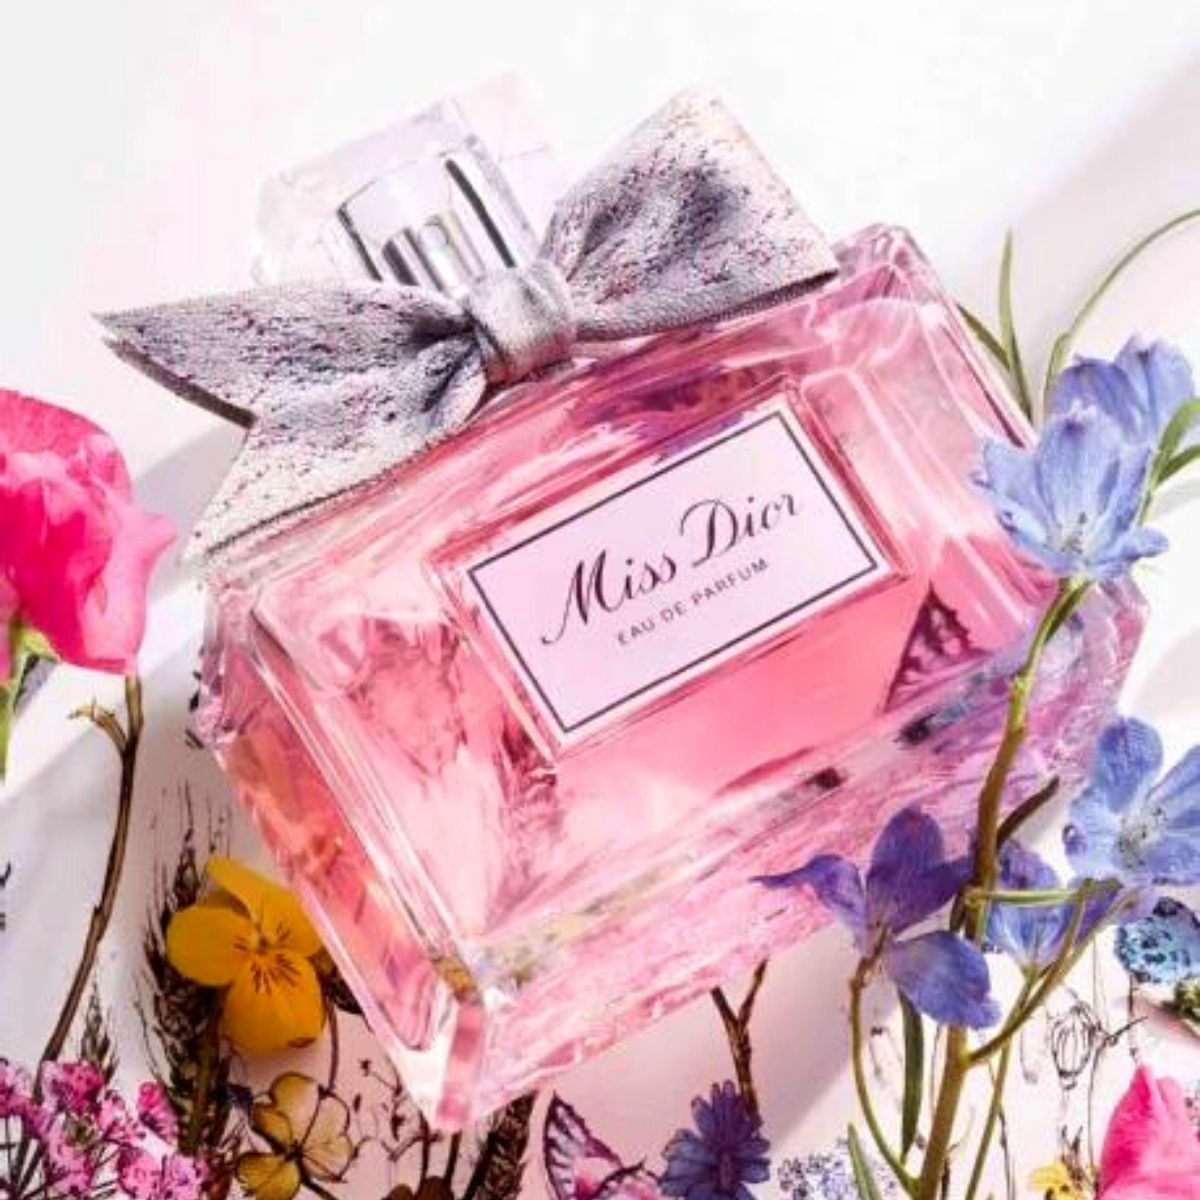 And You? What Would You Do for Love? Wake Up: Miss Dior, the New Fragrance - Article on Thursd